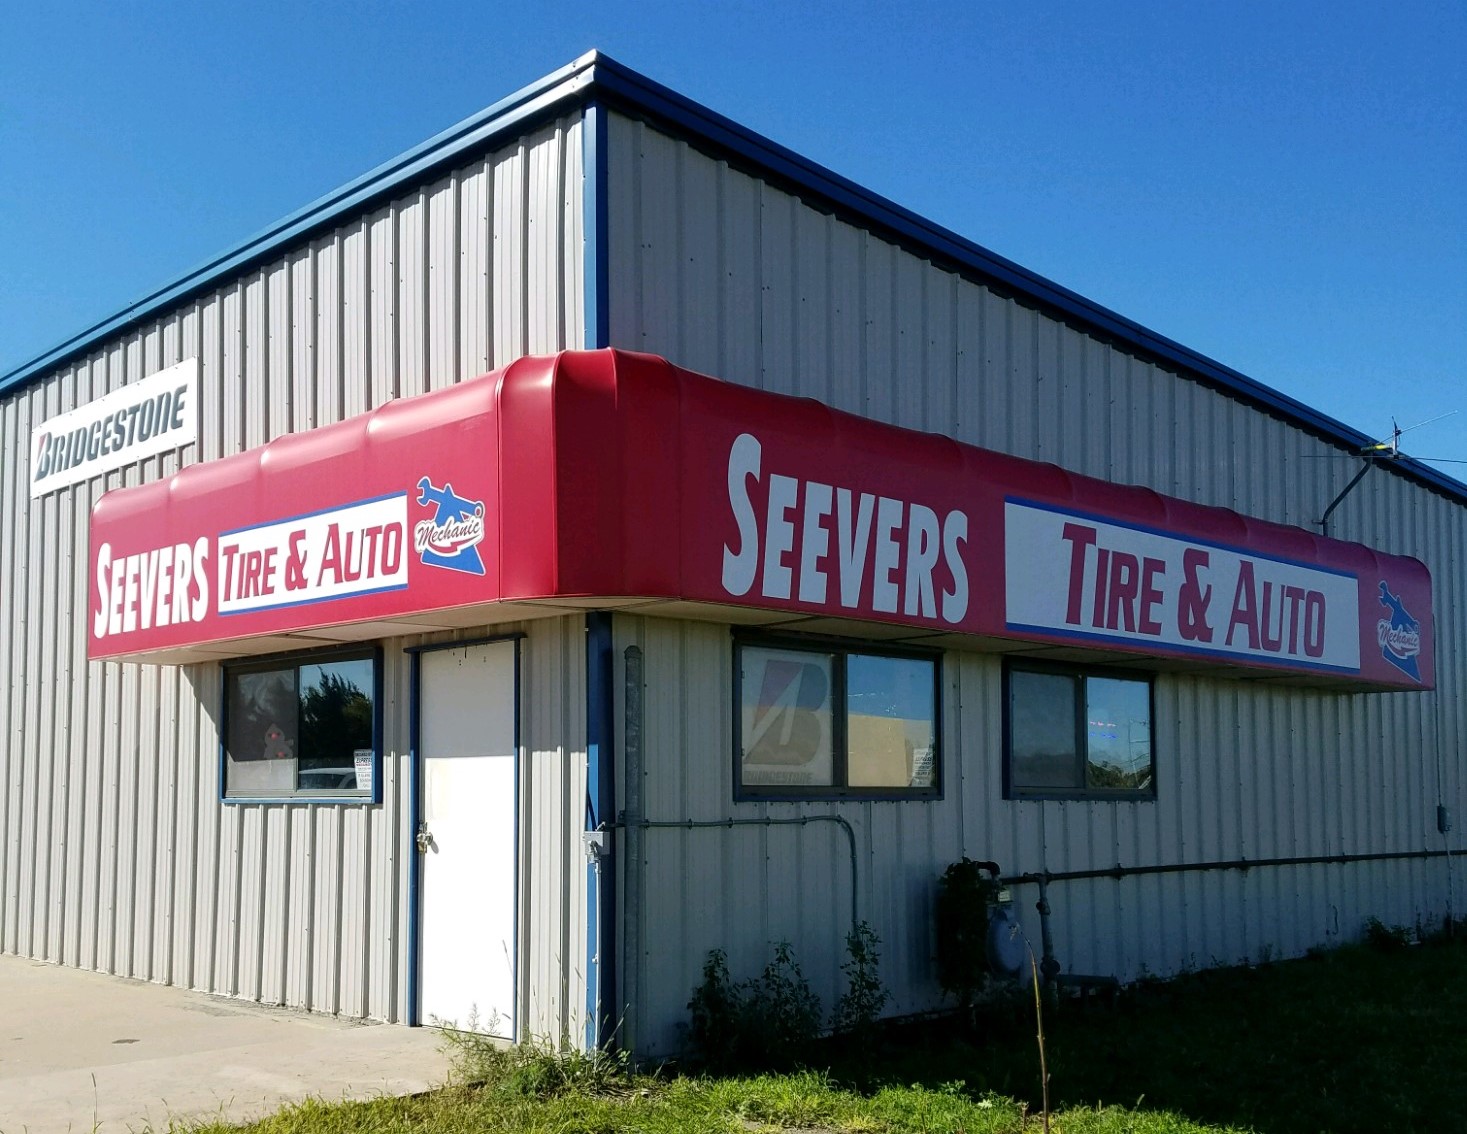 Seevers Tire & Auto